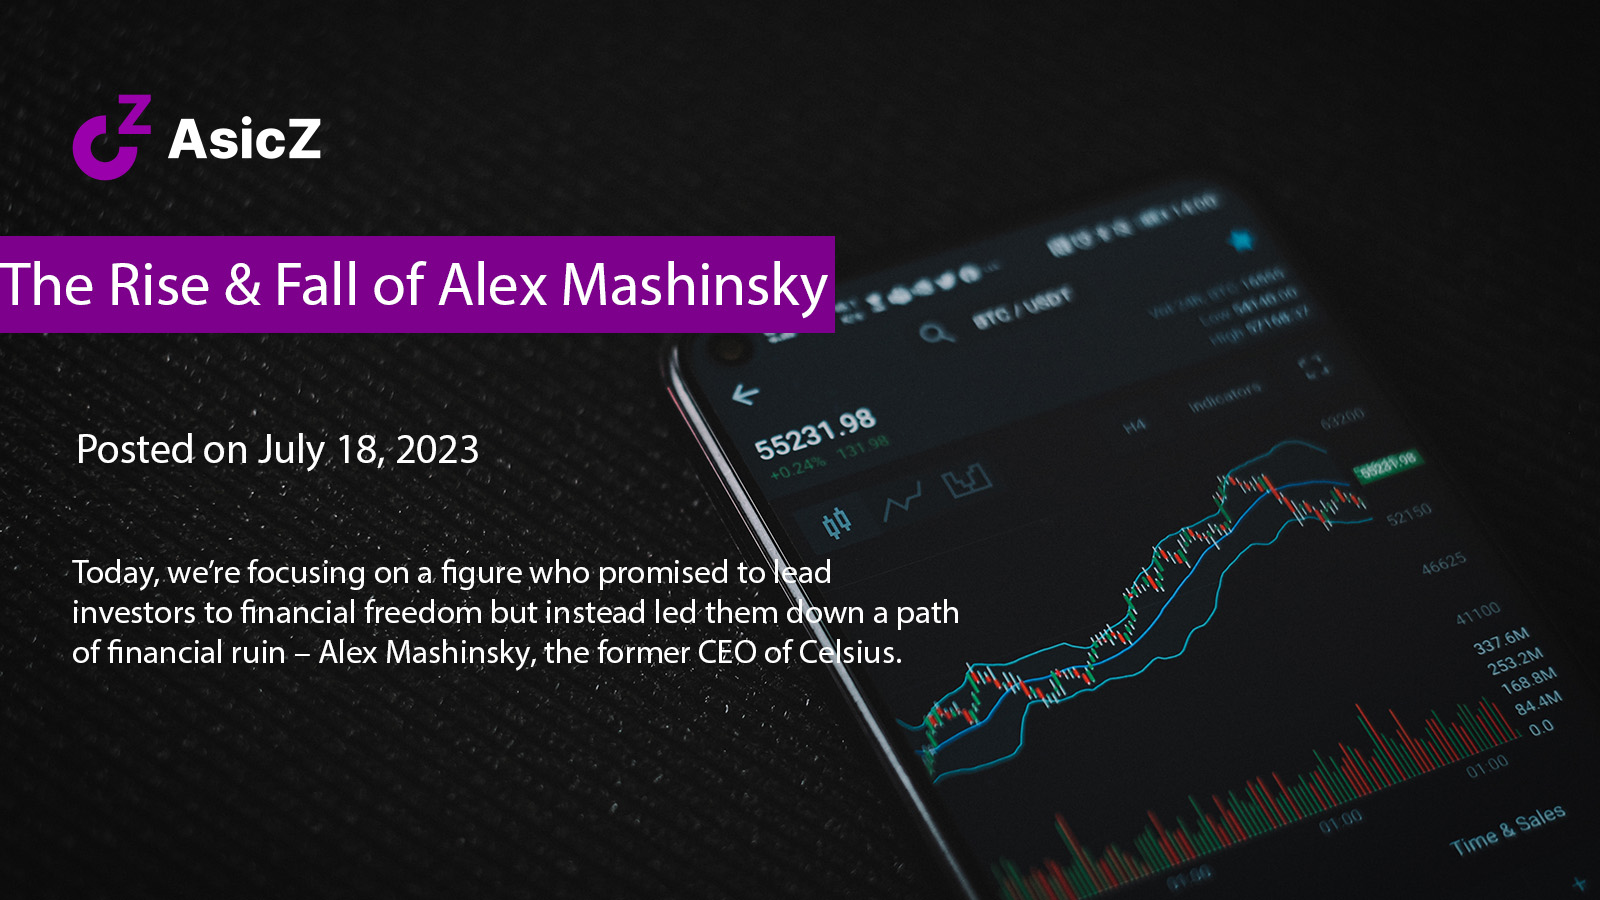 The Rise and Fall of Alex Mashinsky: A Tale of Deception and Broken Trust